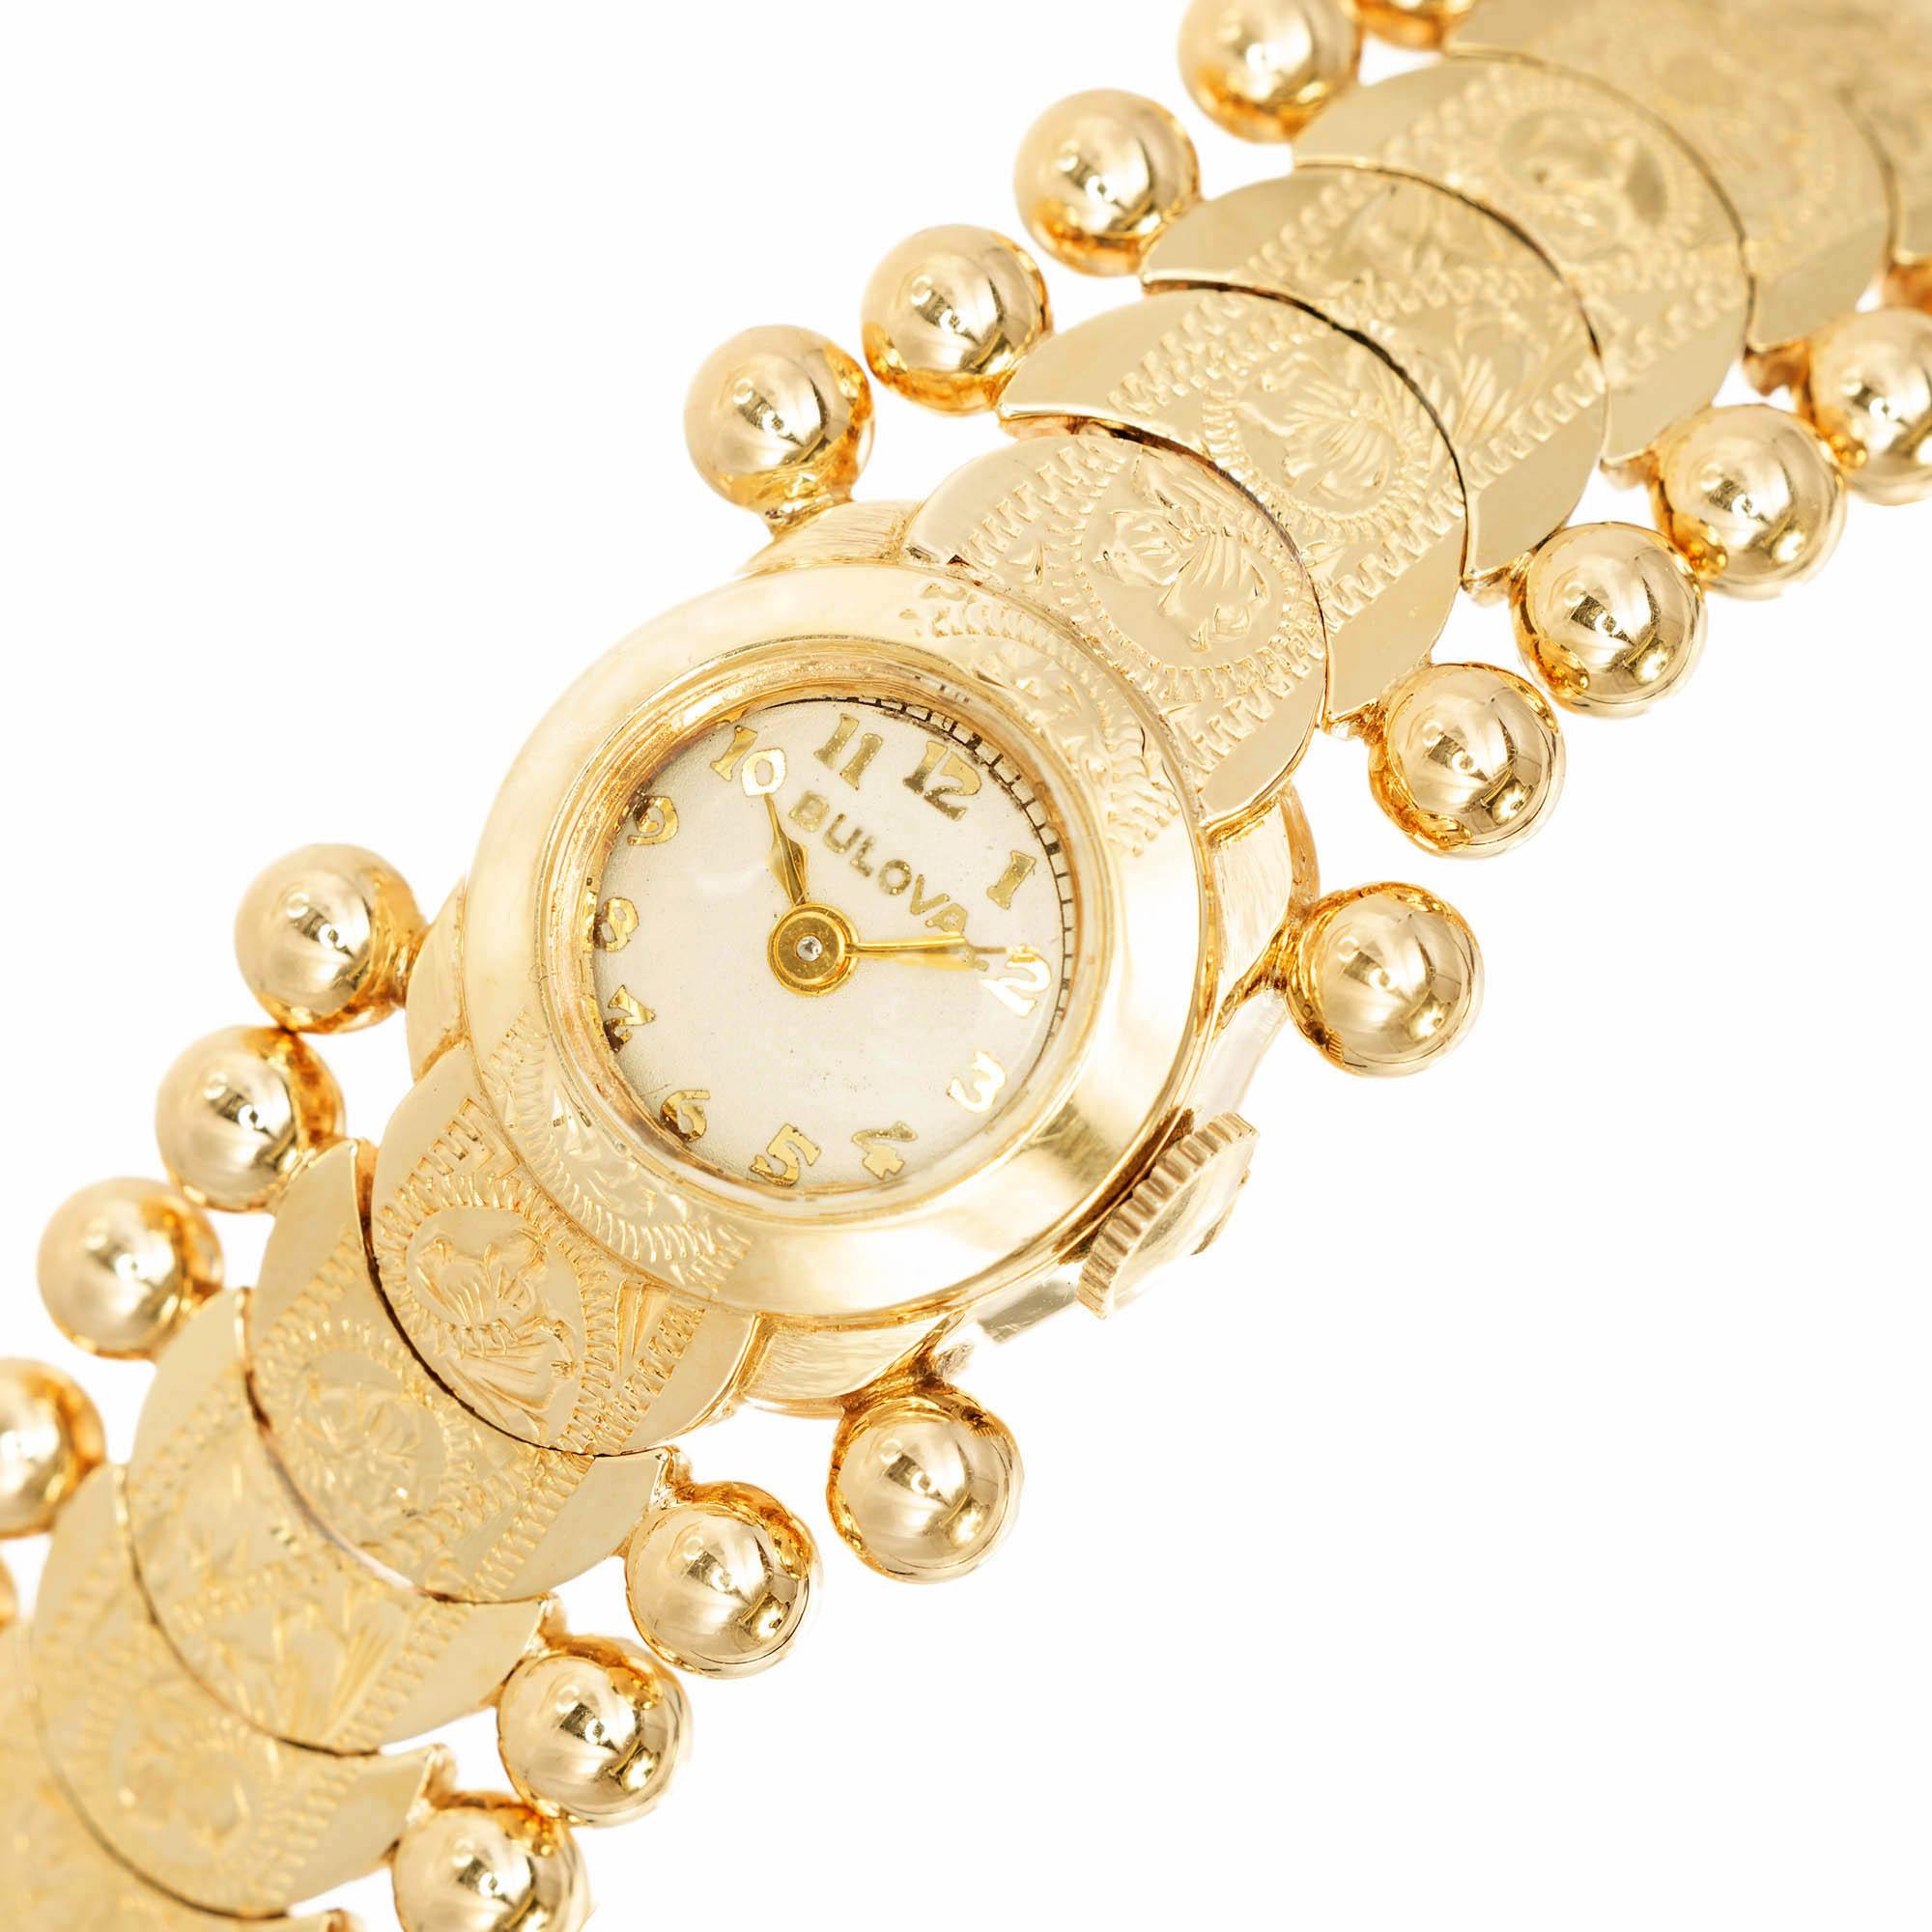 Ladies 14k yellow gold Bulova wristwatch. Watch bracelet consists of floral stamped links with a 4mm gold ball attached to each side. 10.5mm bezel with white face, gold numbers and dials. Contains a link style safety chain.

14k Yellow Gold
36.60